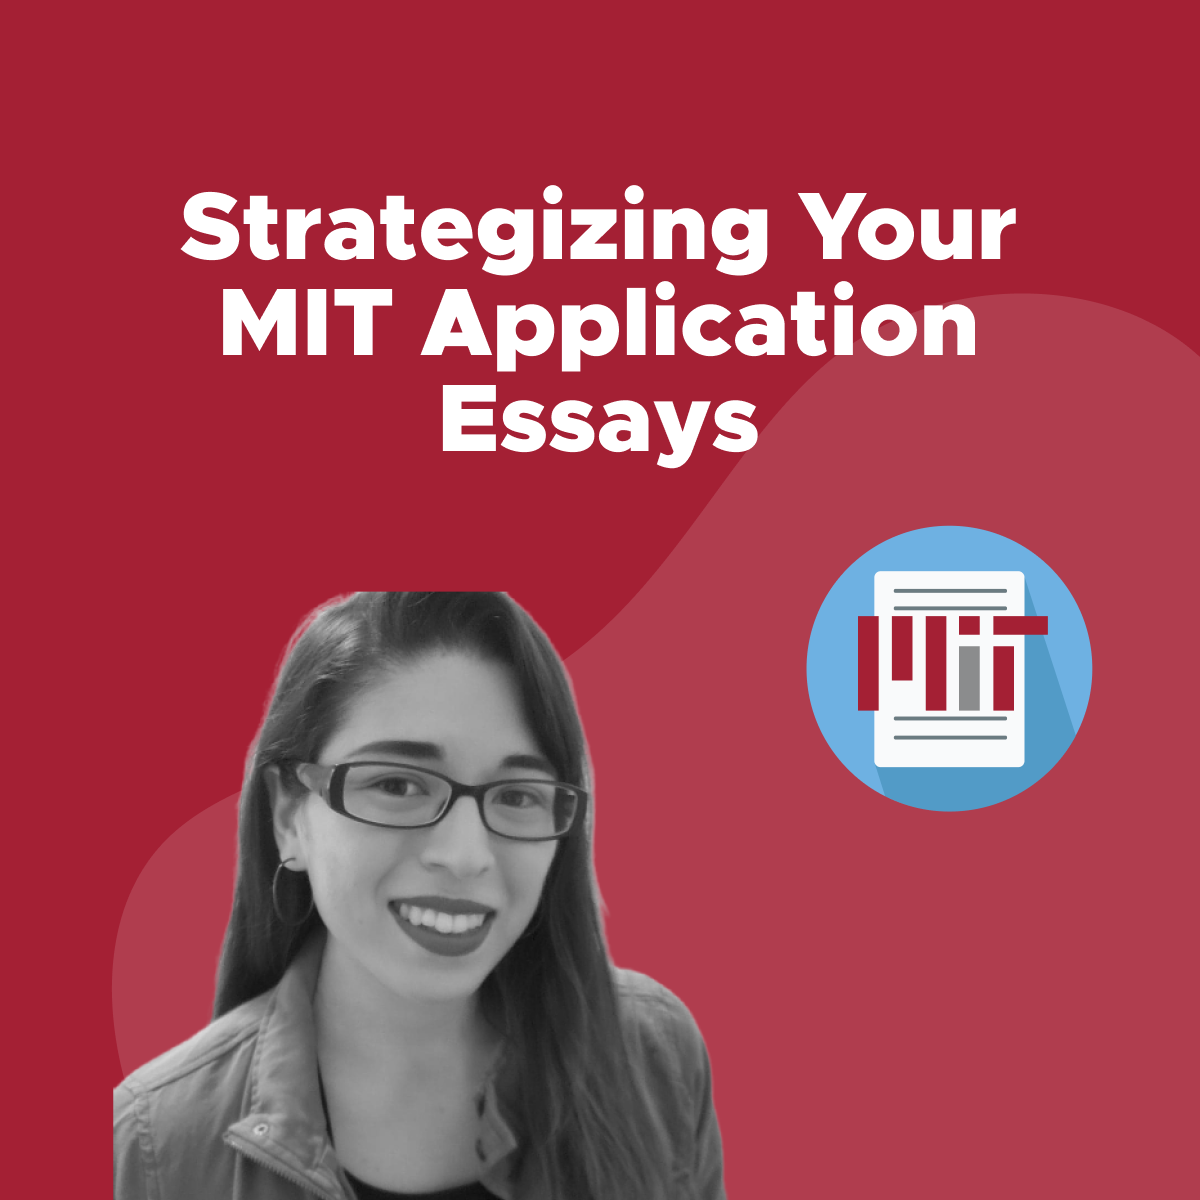 how many essays for mit application